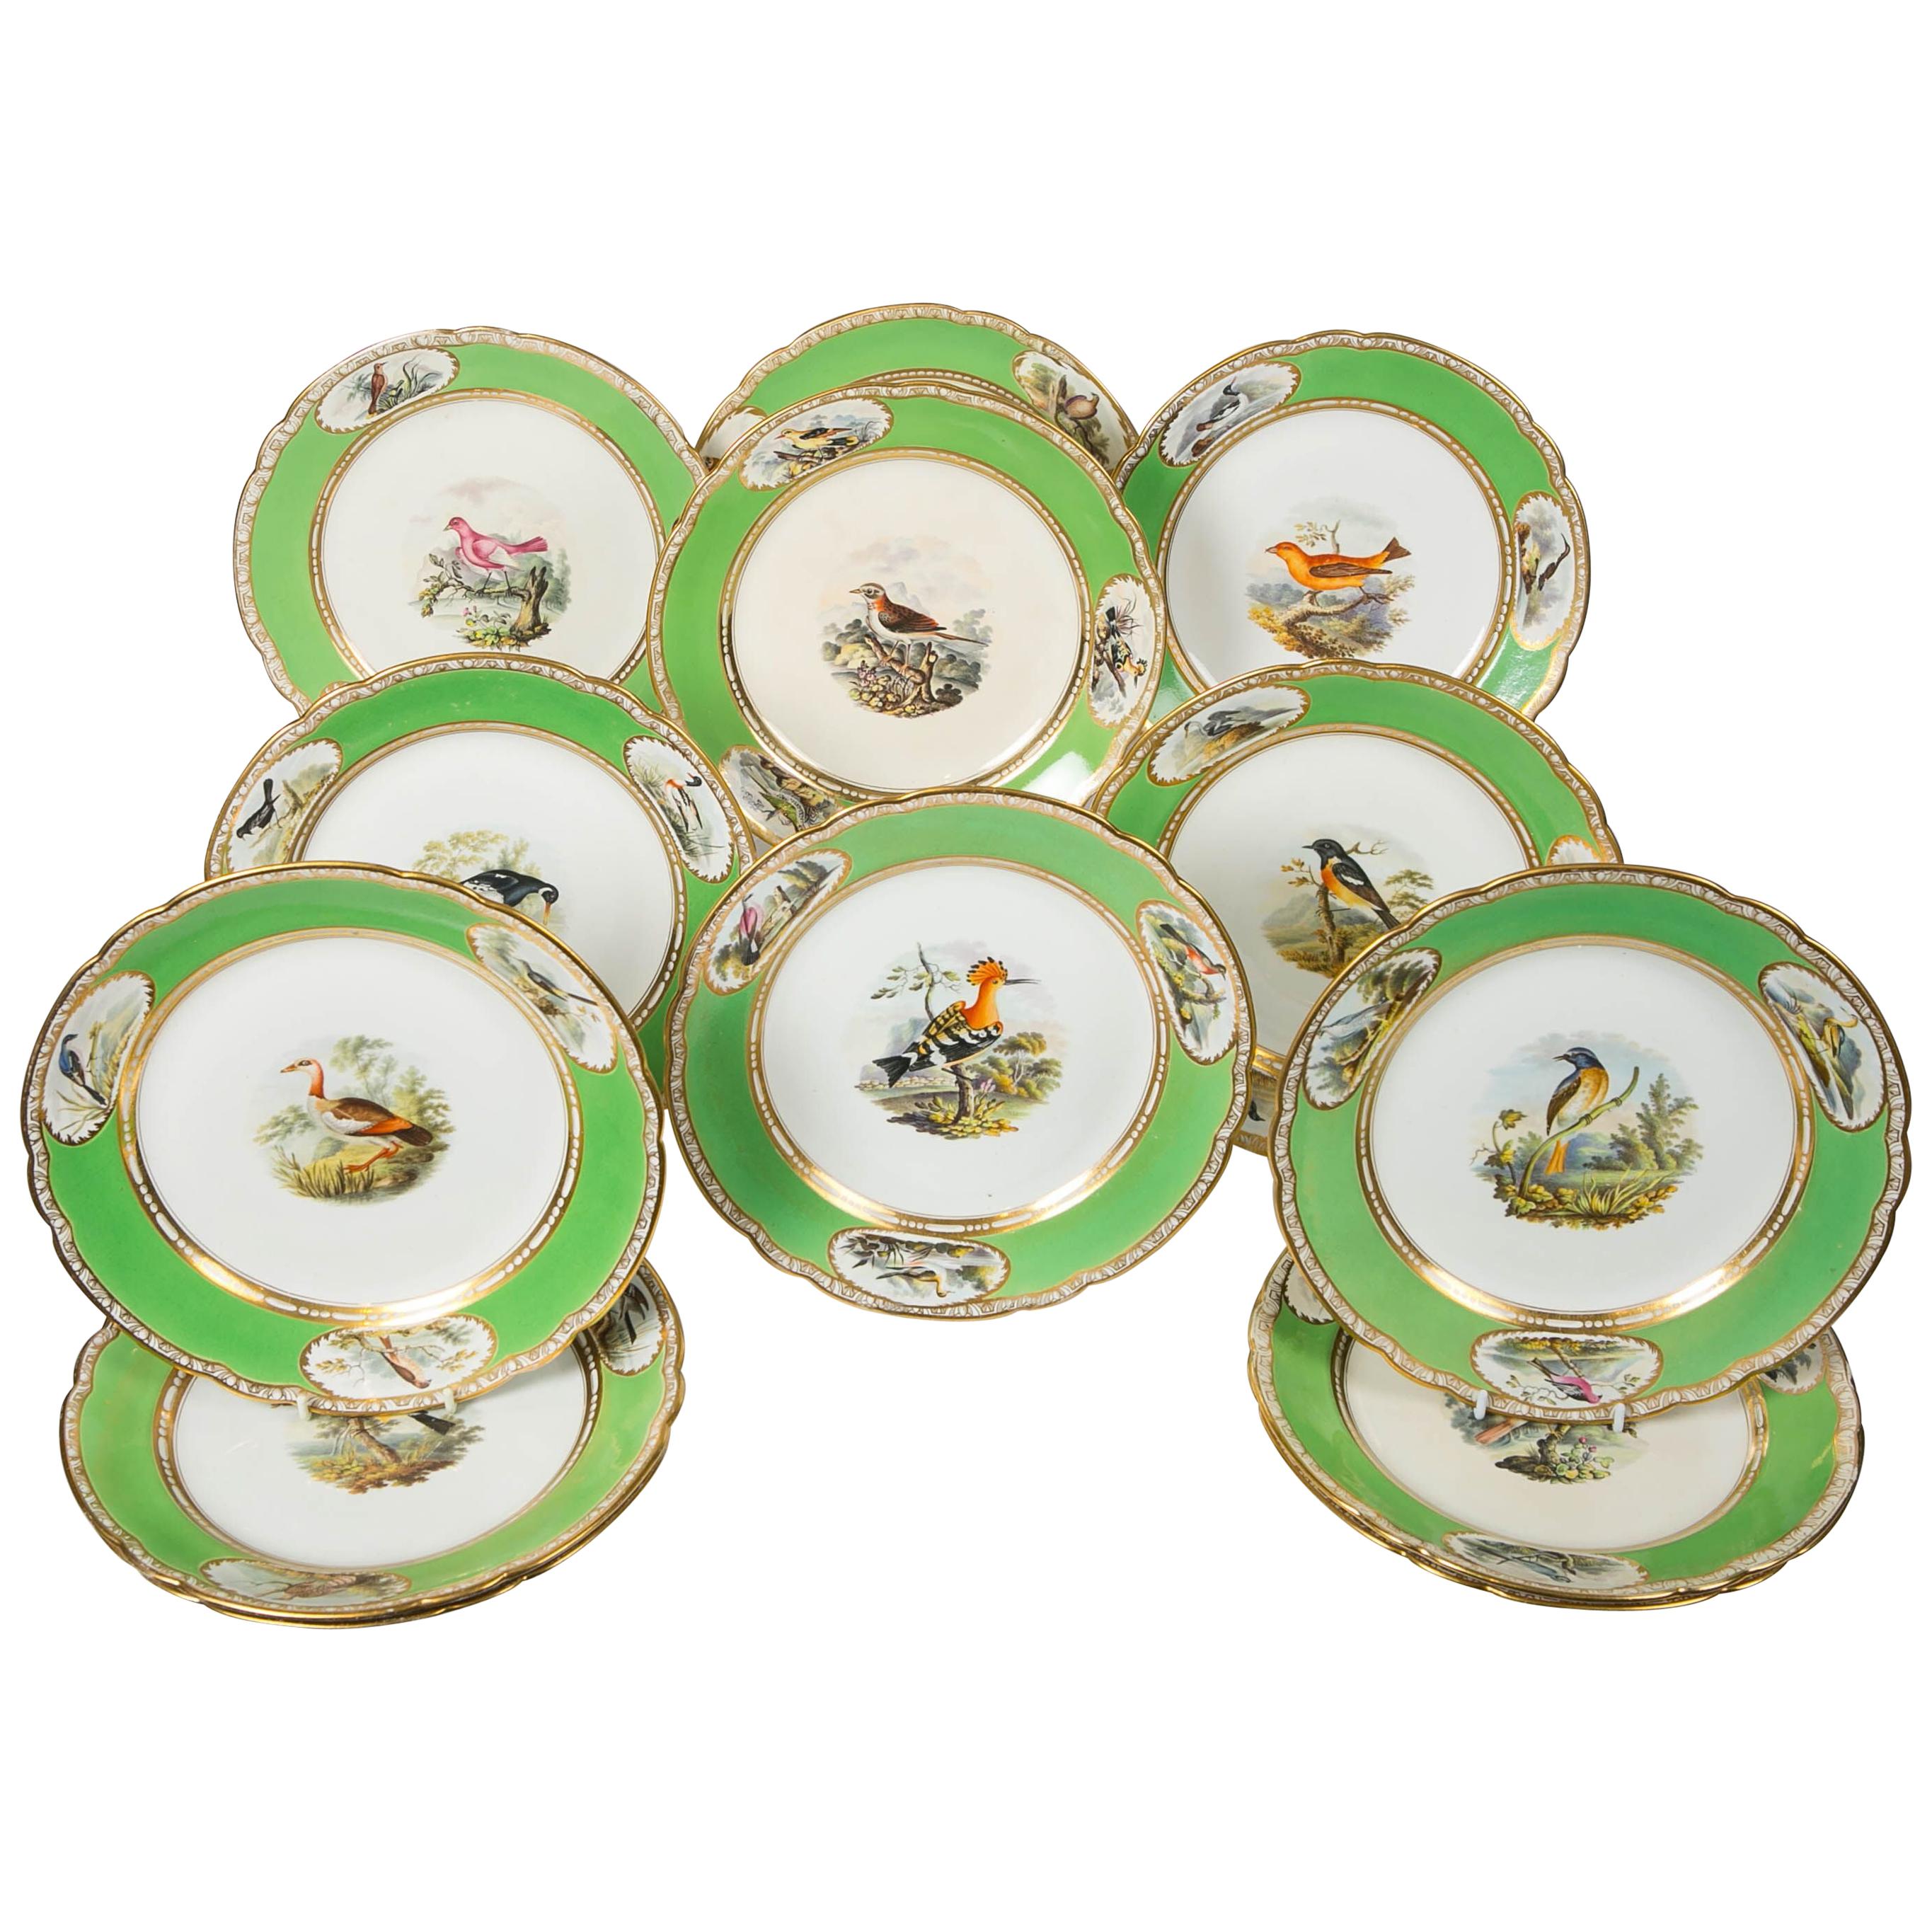 Bird Lover's Set Antique Porcelain Dishes Hand Painted Apple Green Borders